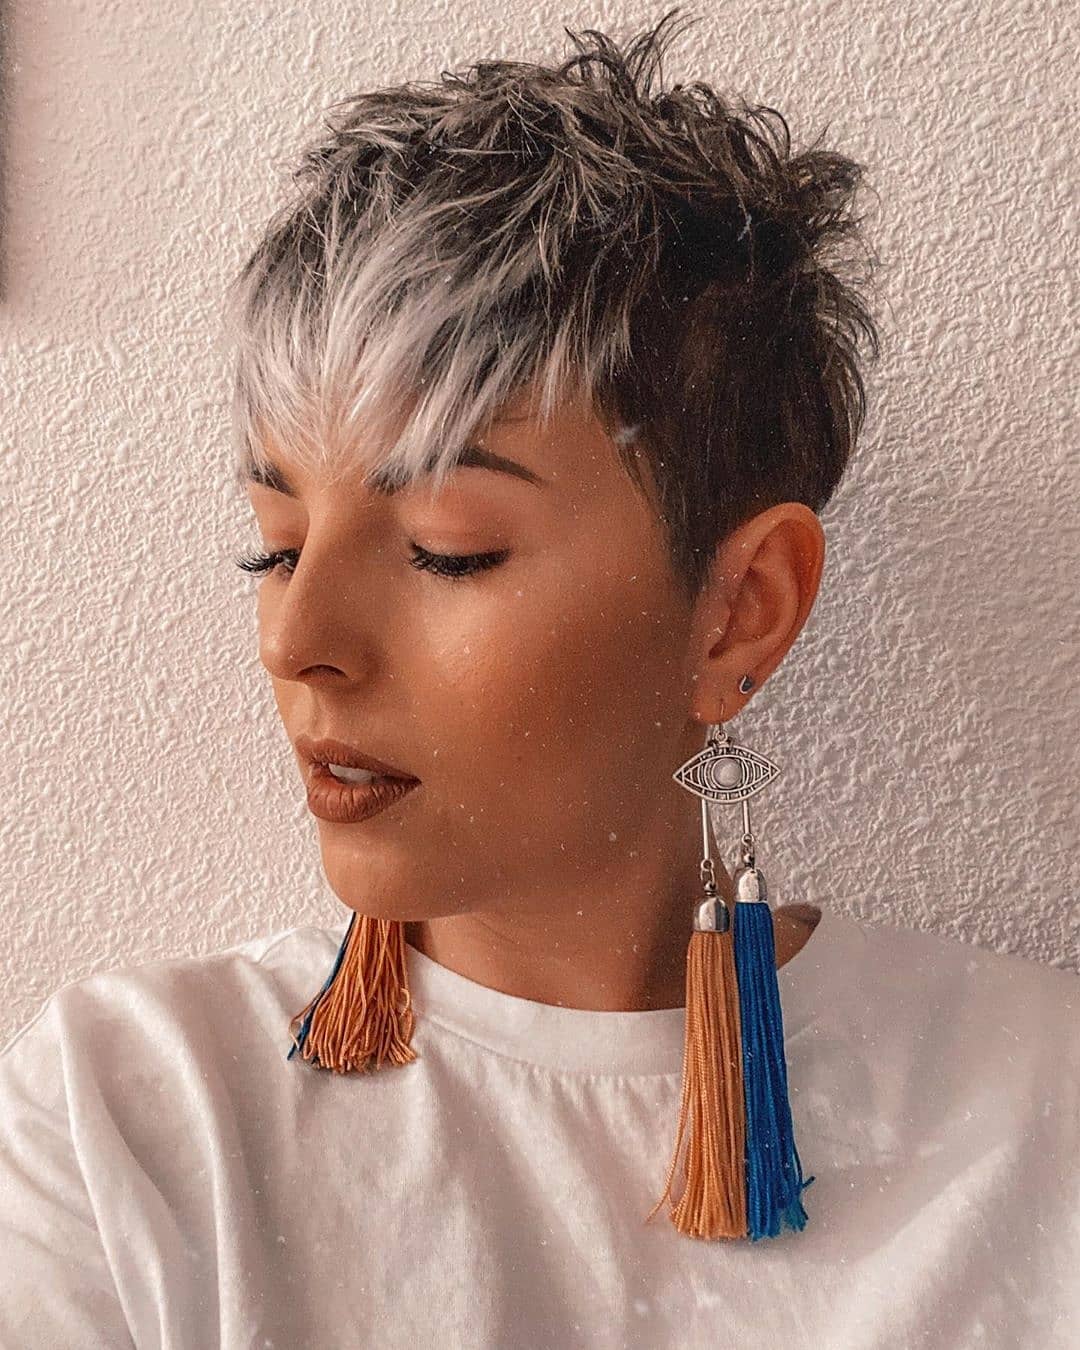 10 Easy Stylish Pixie Haircuts For Women Short Pixie Hair Styles 2020 2021